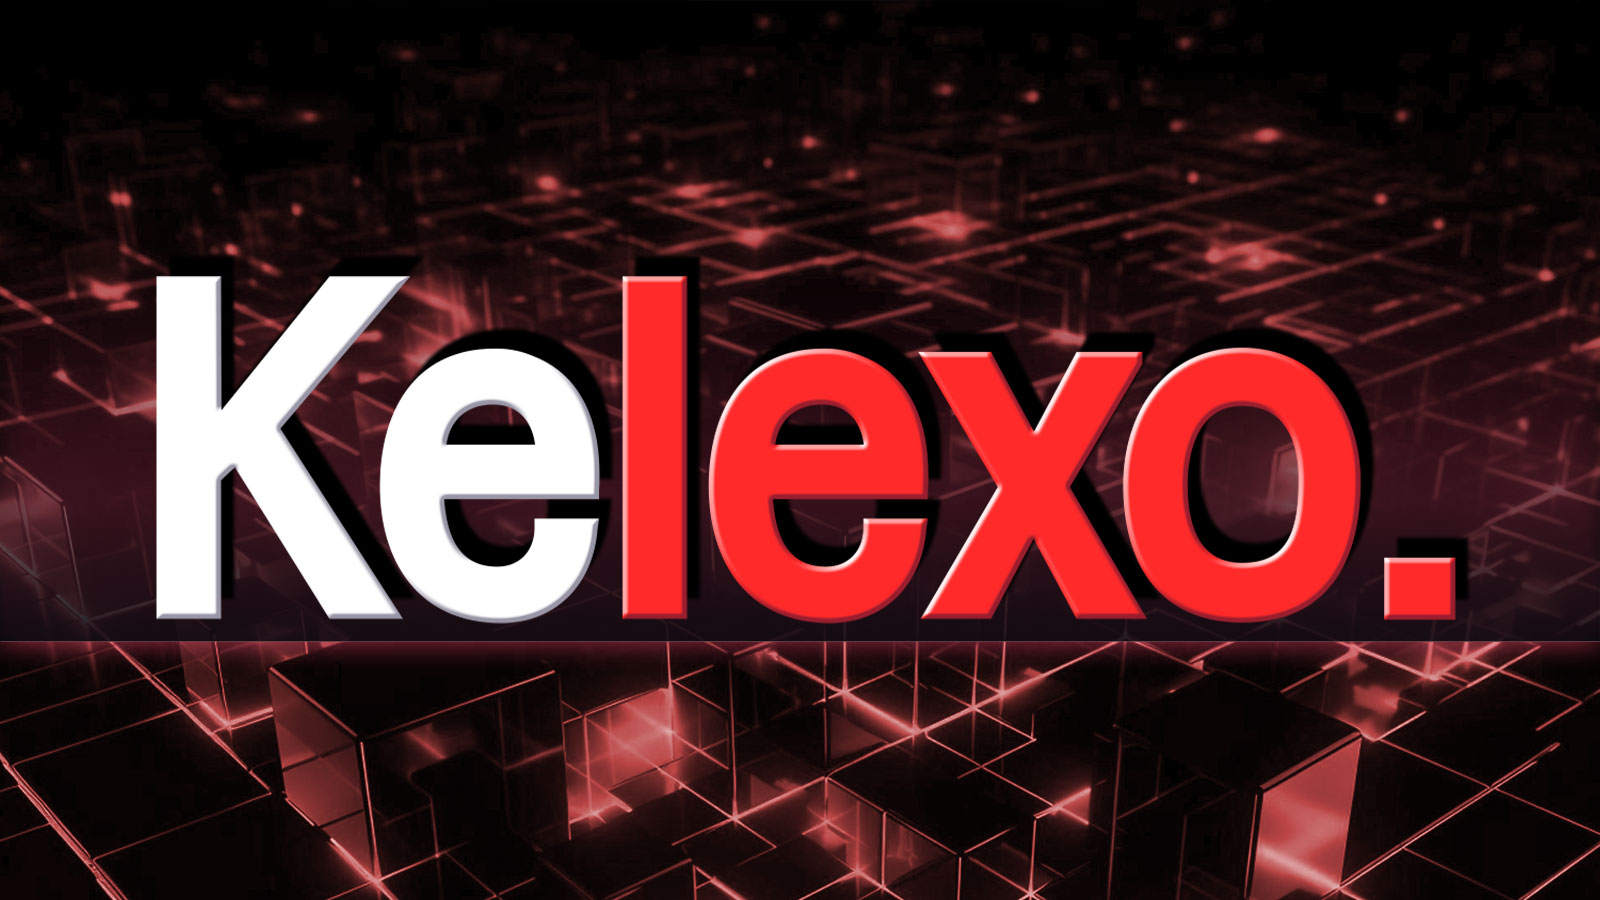 Kelexo (KLXO) Pre-Sale Welcomed by Novel Altcoiners Cohort while Litecoin (LTC) and Cardano (ADA) Hit Trading Volume Records